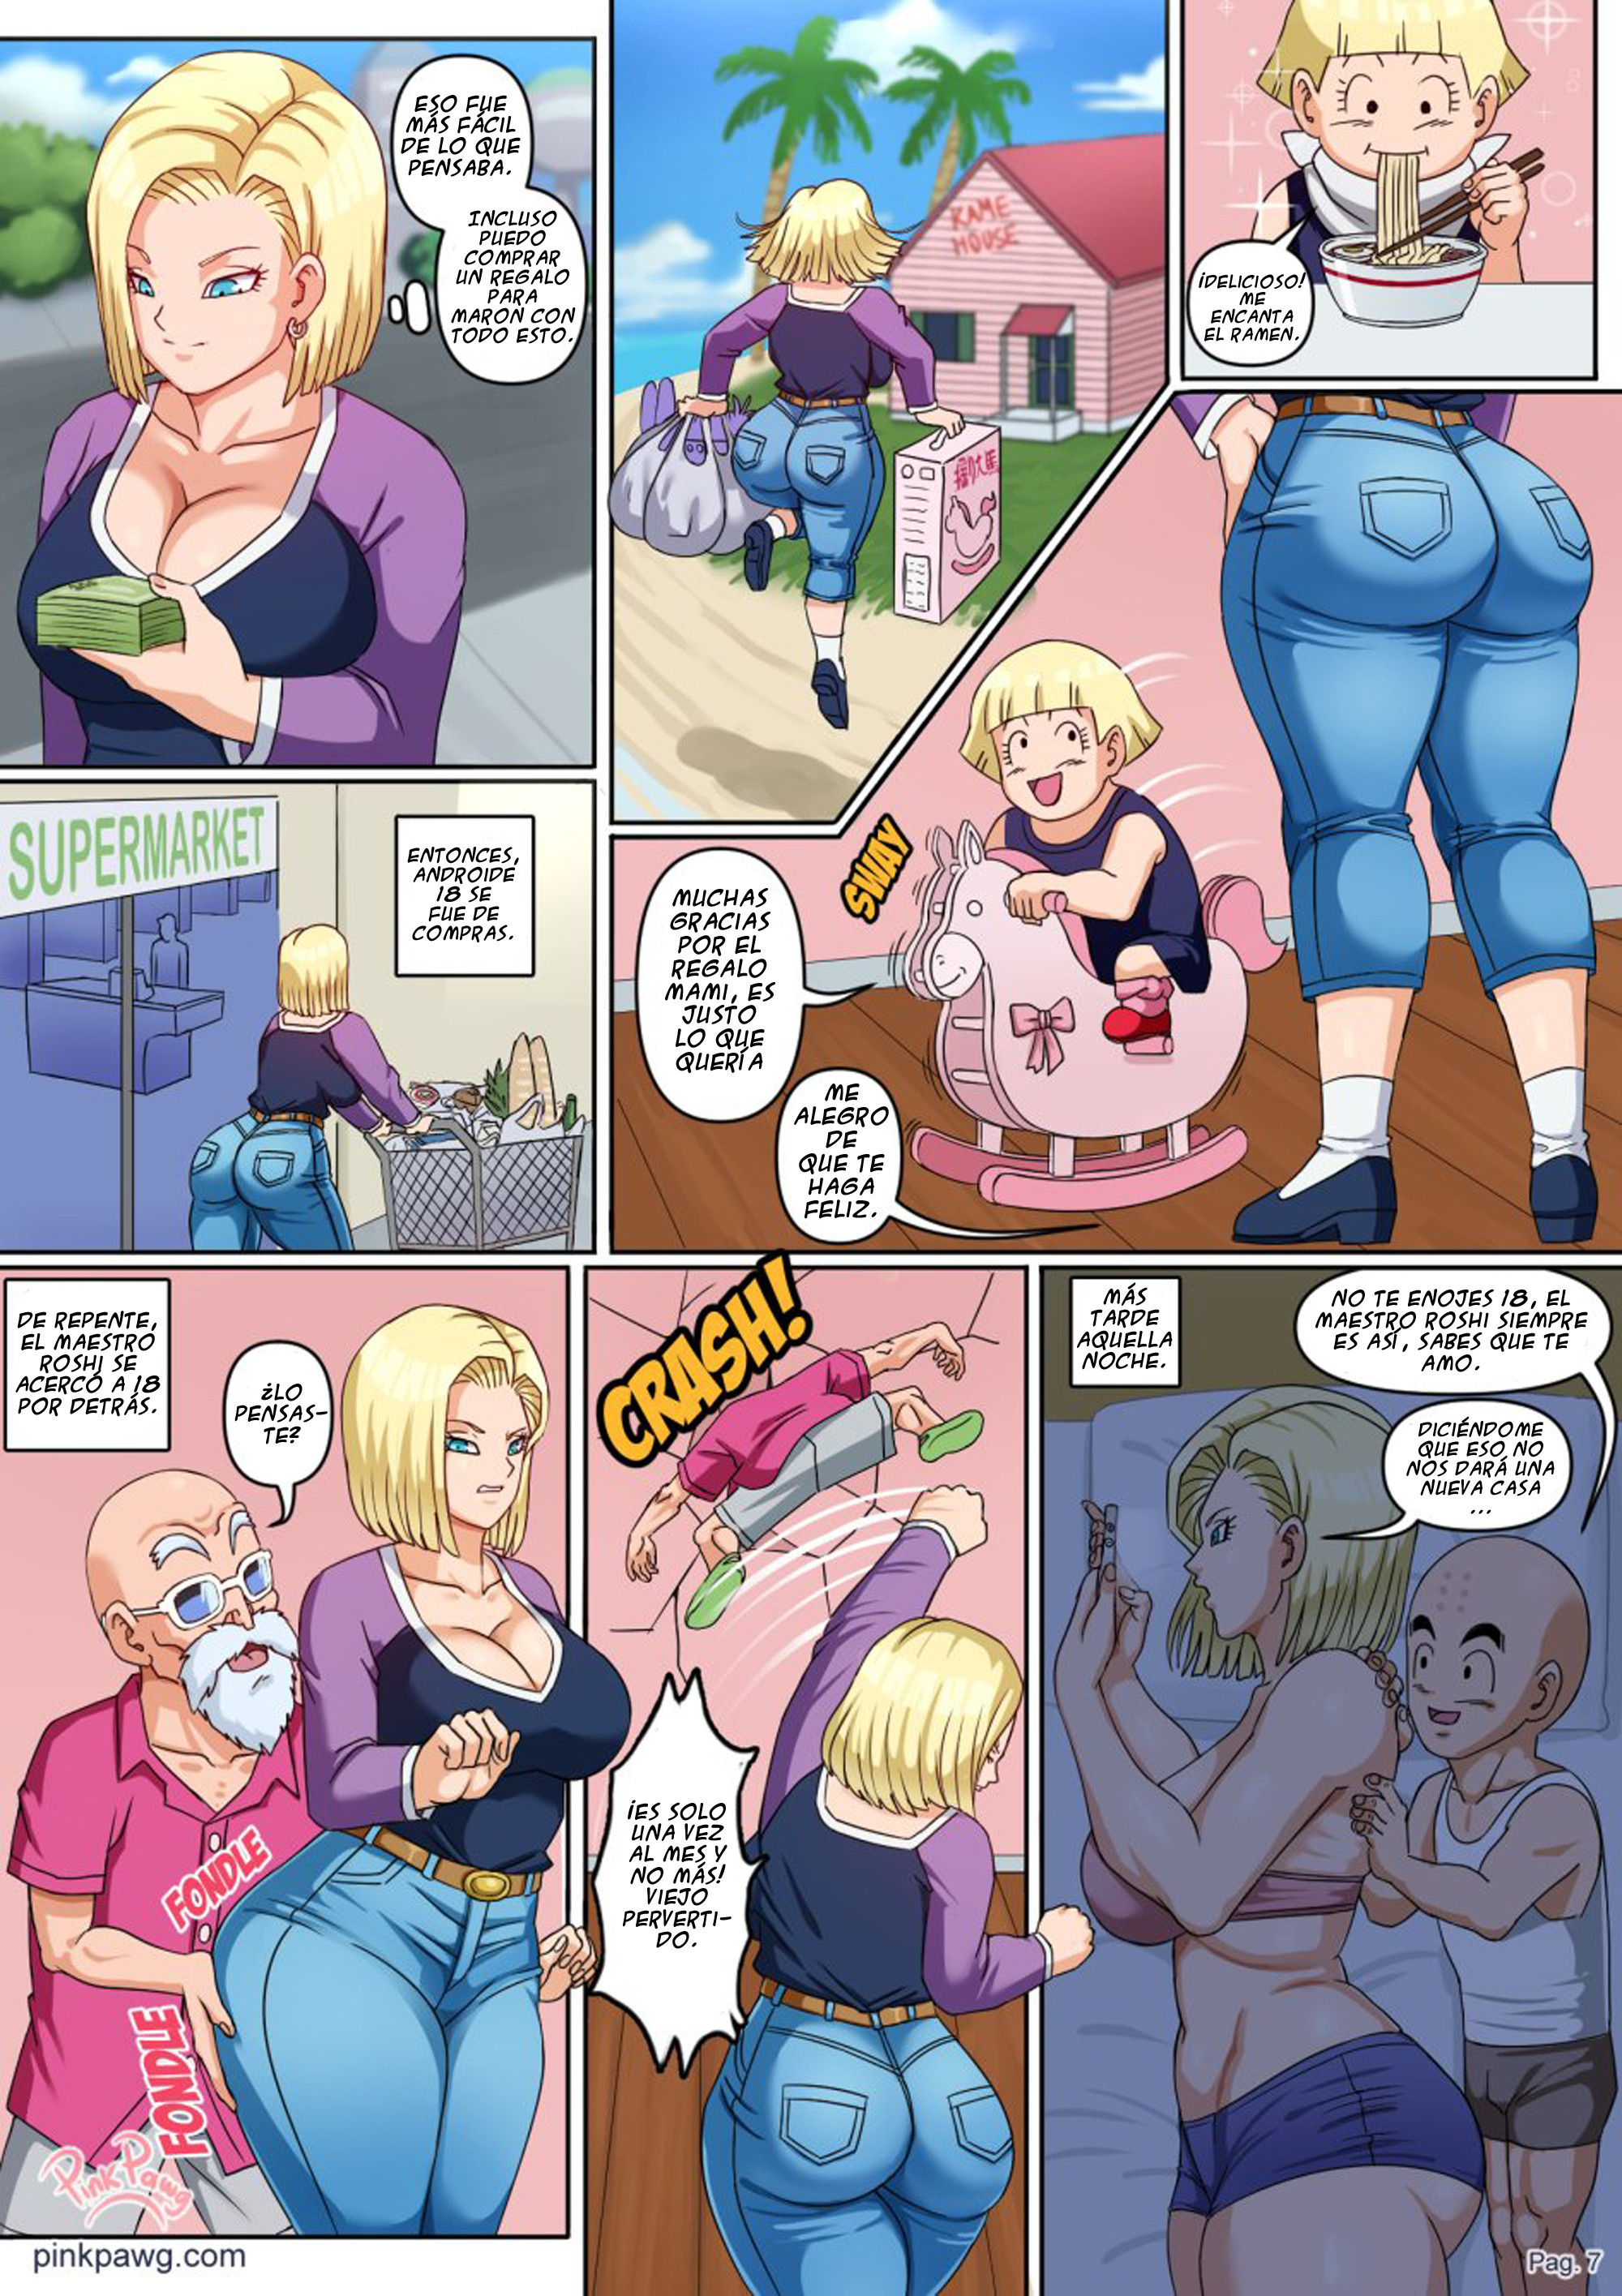 [Pink Pawg] Android 18 NTR Ep.4 - 6